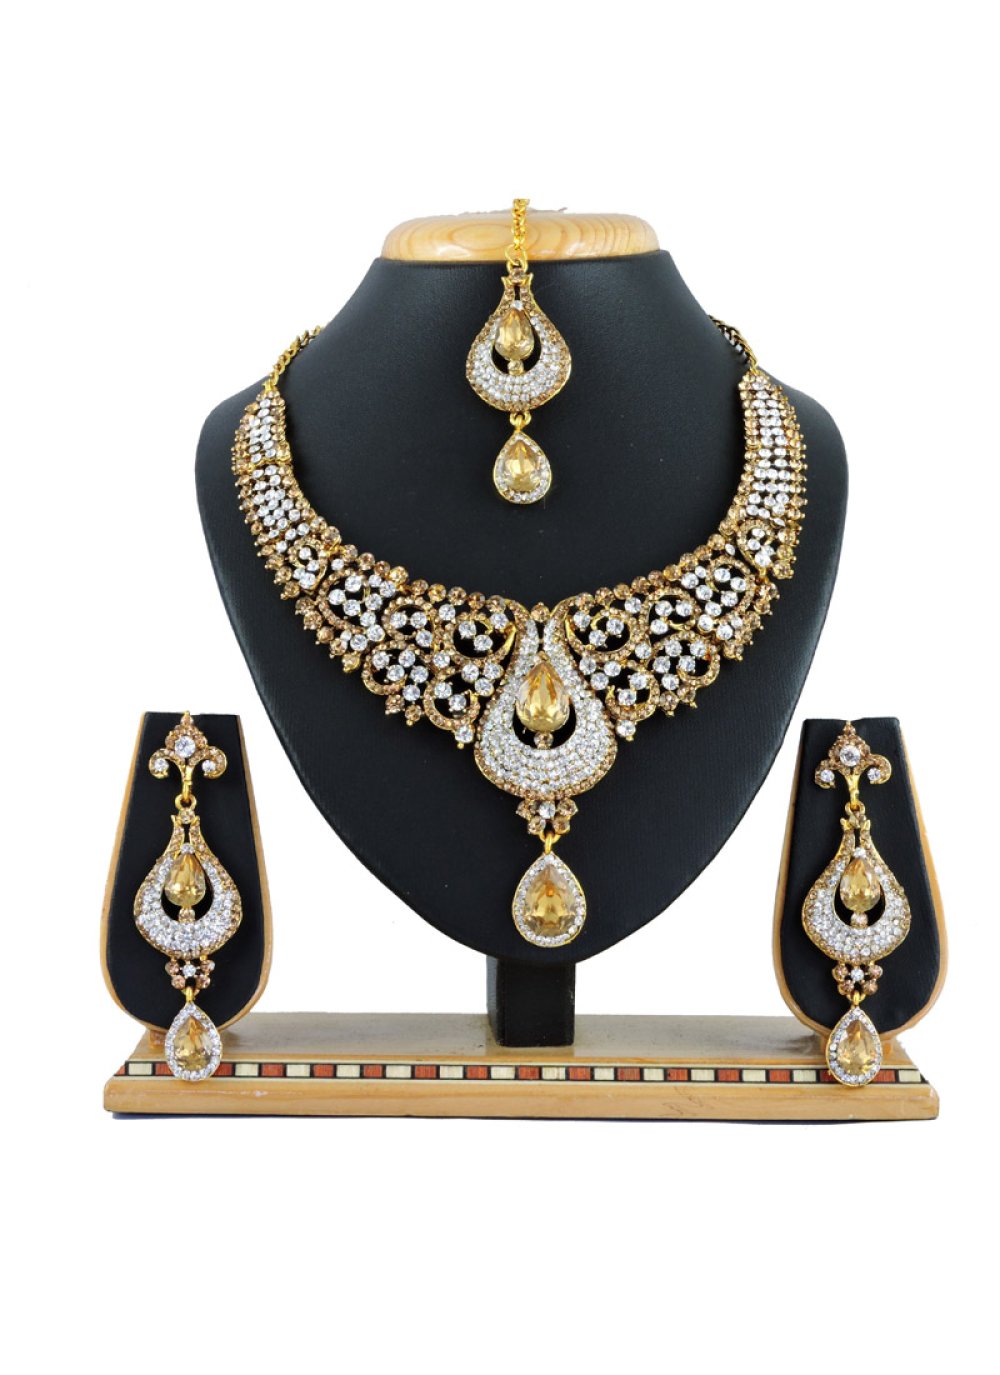 Royal Gold and White Alloy Gold Rodium Polish Necklace Set For Festival